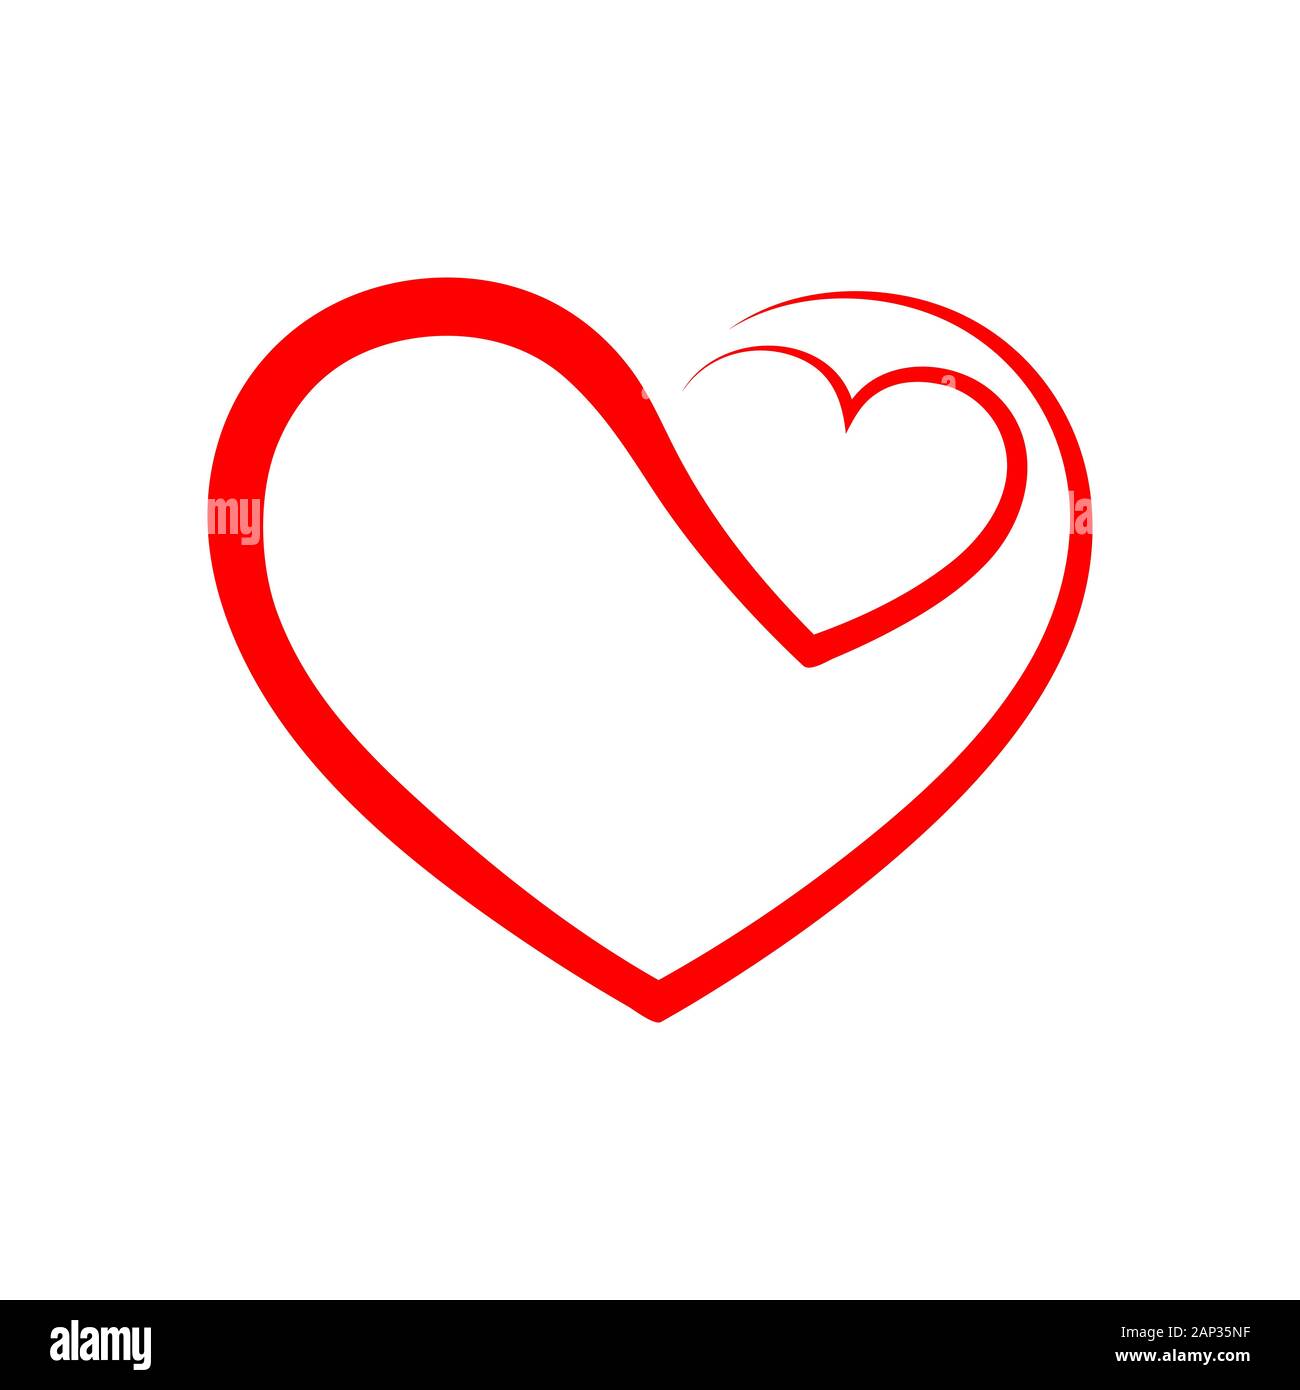 Abstract Heart Shape Outline Vector Illustration Red Heart Icon In Flat Style The Heart As A Symbol Of Love 2AP35NF 